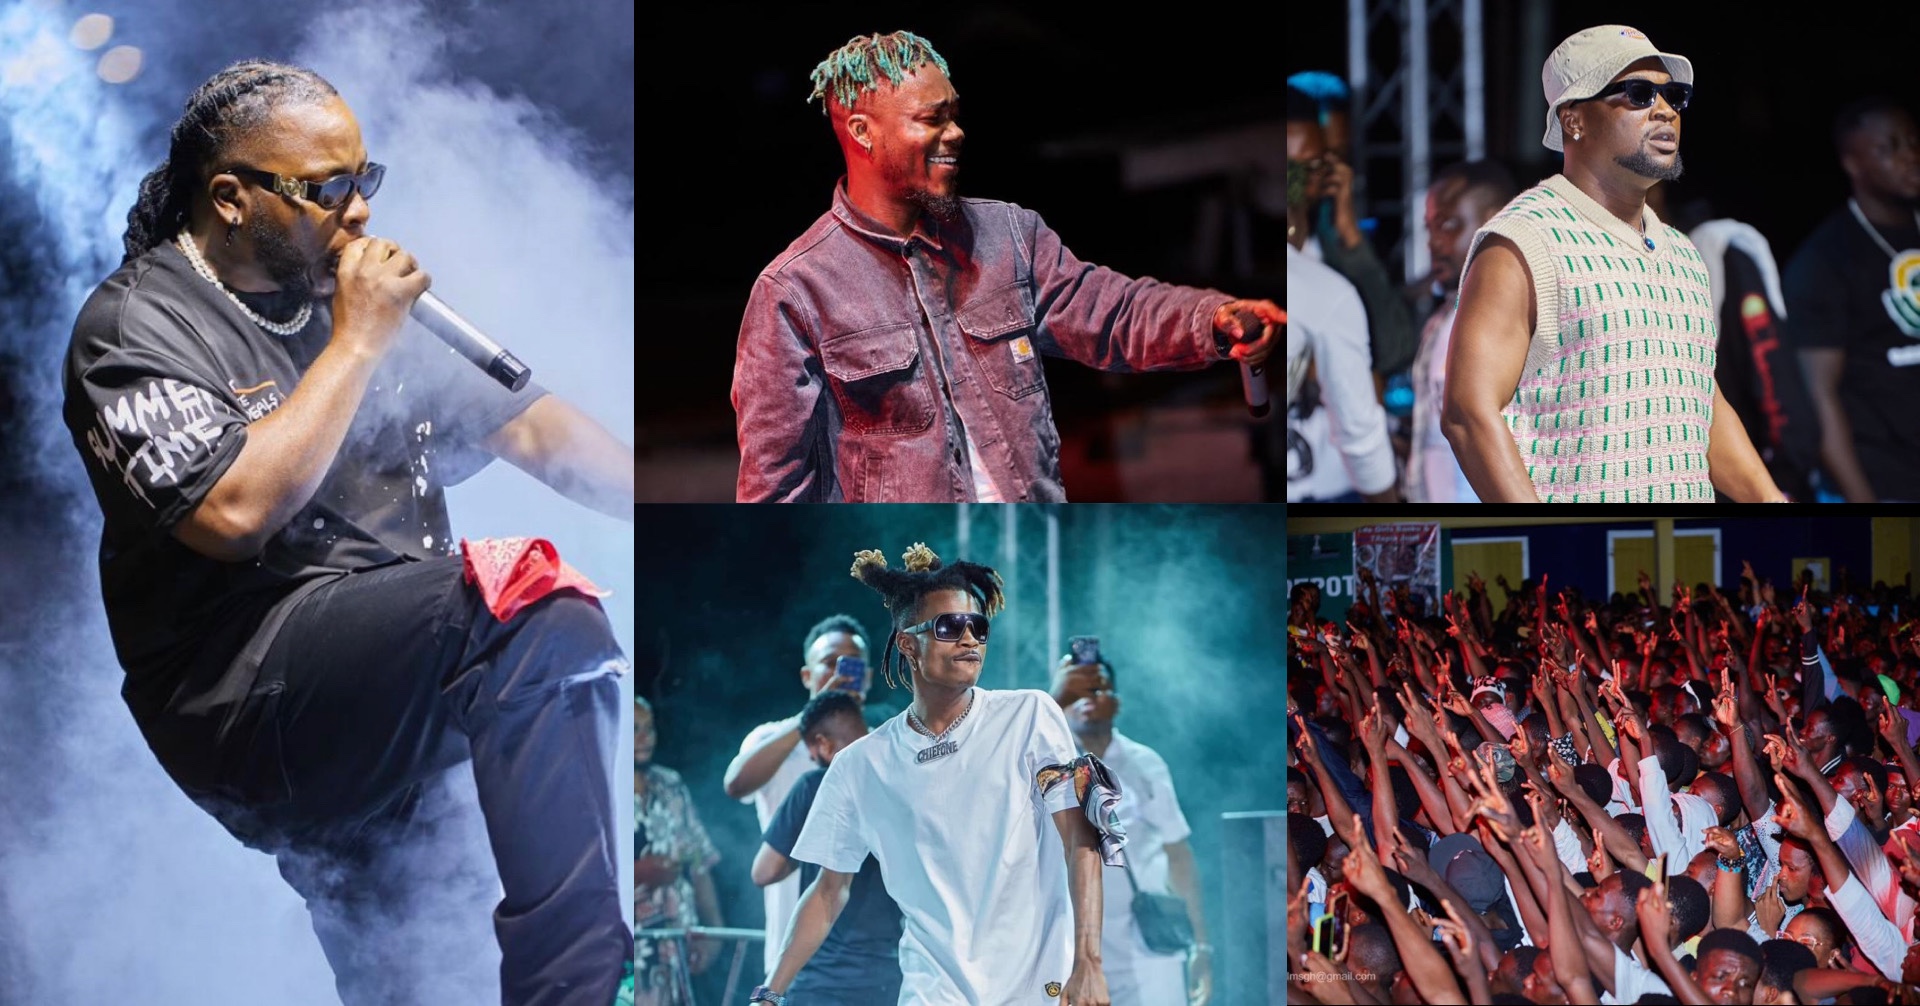 PHOTOS: Asogli Yam Festival Concert pulls massive crowd – over 15,000 attendees with headliners Edem, Camidoh, Cina Soul, Chief One, Keeny Ice